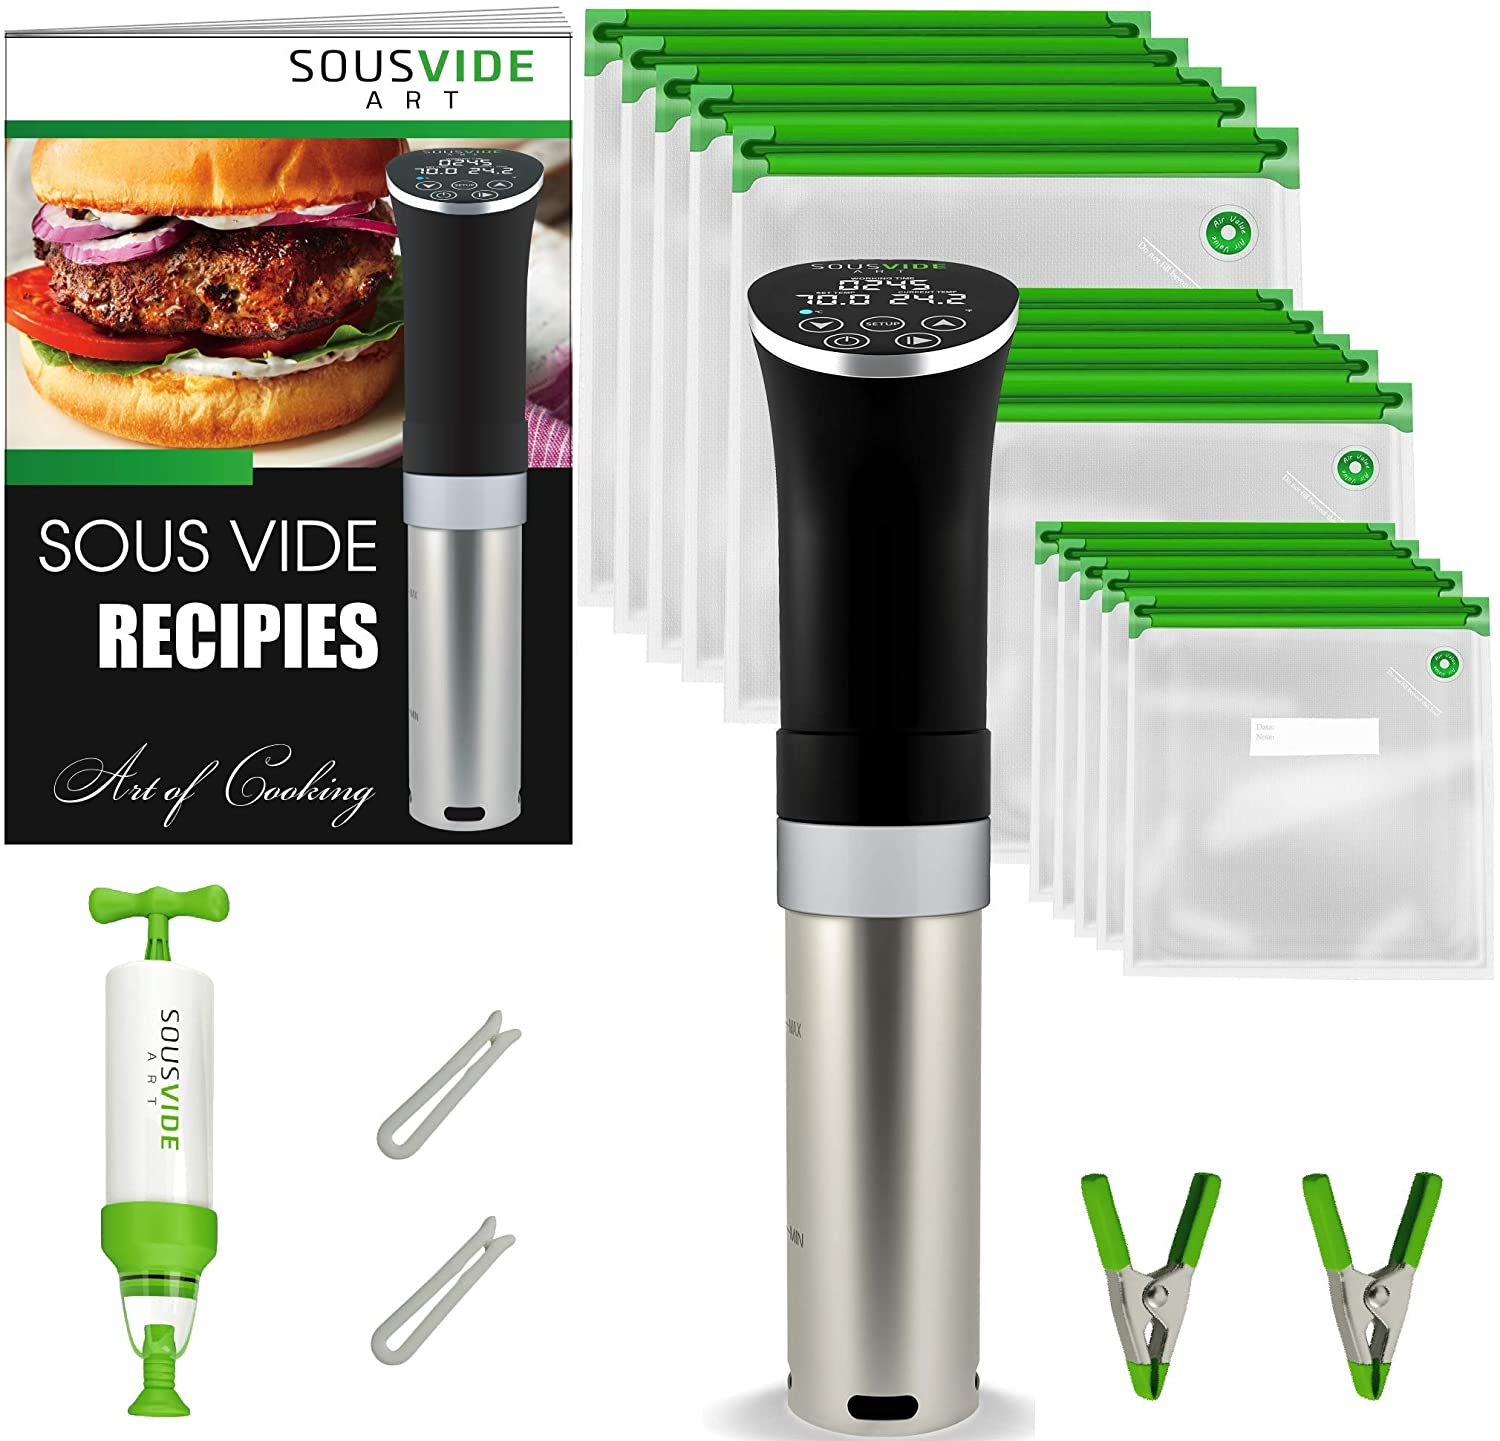 SOUSVIDE ART Hands-Free Sous Vide For The Home Cook